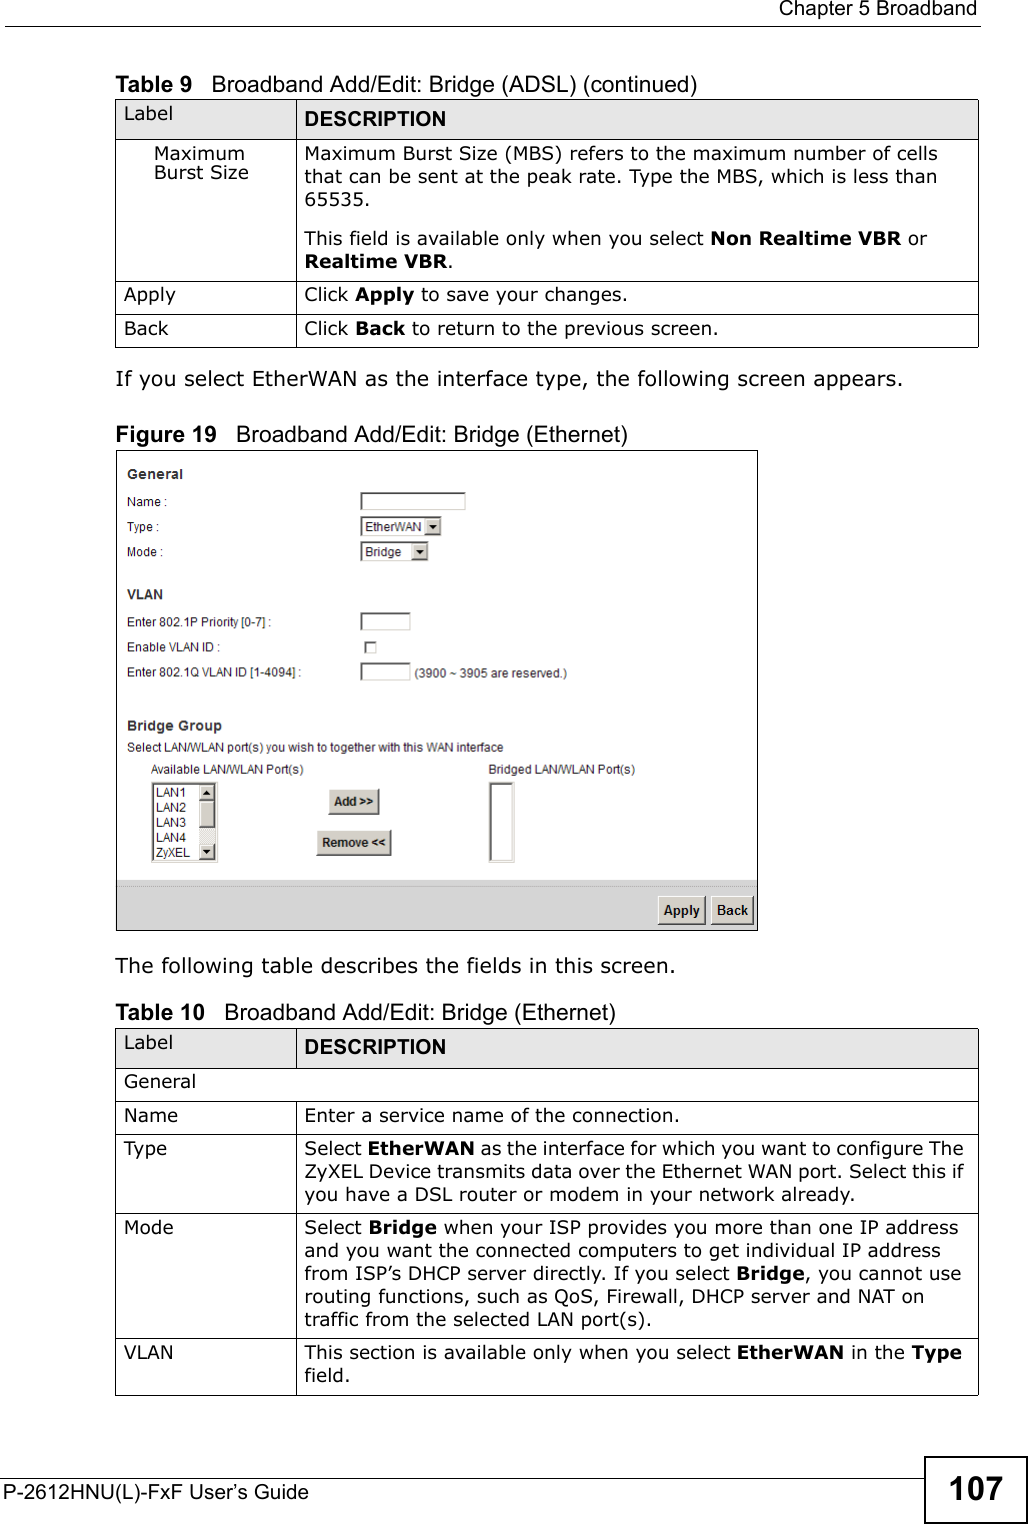  Chapter 5 BroadbandP-2612HNU(L)-FxF User’s Guide 107If you select EtherWAN as the interface type, the following screen appears.Figure 19   Broadband Add/Edit: Bridge (Ethernet)The following table describes the fields in this screen.Maximum Burst Size Maximum Burst Size (MBS) refers to the maximum number of cells that can be sent at the peak rate. Type the MBS, which is less than65535.This field is available only when you select Non Realtime VBR or Realtime VBR.Apply Click Apply to save your changes.Back Click Back to return to the previous screen.Table 10   Broadband Add/Edit: Bridge (Ethernet)Label DESCRIPTIONGeneralName Enter a service name of the connection.Type Select EtherWAN as the interface for which you want to configure The ZyXEL Device transmits data over the Ethernet WAN port. Select this if you have a DSL router or modem in your network already.Mode Select Bridge when your ISP provides you more than one IP address and you want the connected computers to get individual IP address from ISP’s DHCP server directly. If you select Bridge, you cannot use routing functions, such as QoS, Firewall, DHCP server and NAT on traffic from the selected LAN port(s).VLAN This section is available only when you select EtherWAN in the Typefield.Table 9   Broadband Add/Edit: Bridge (ADSL) (continued)Label DESCRIPTION